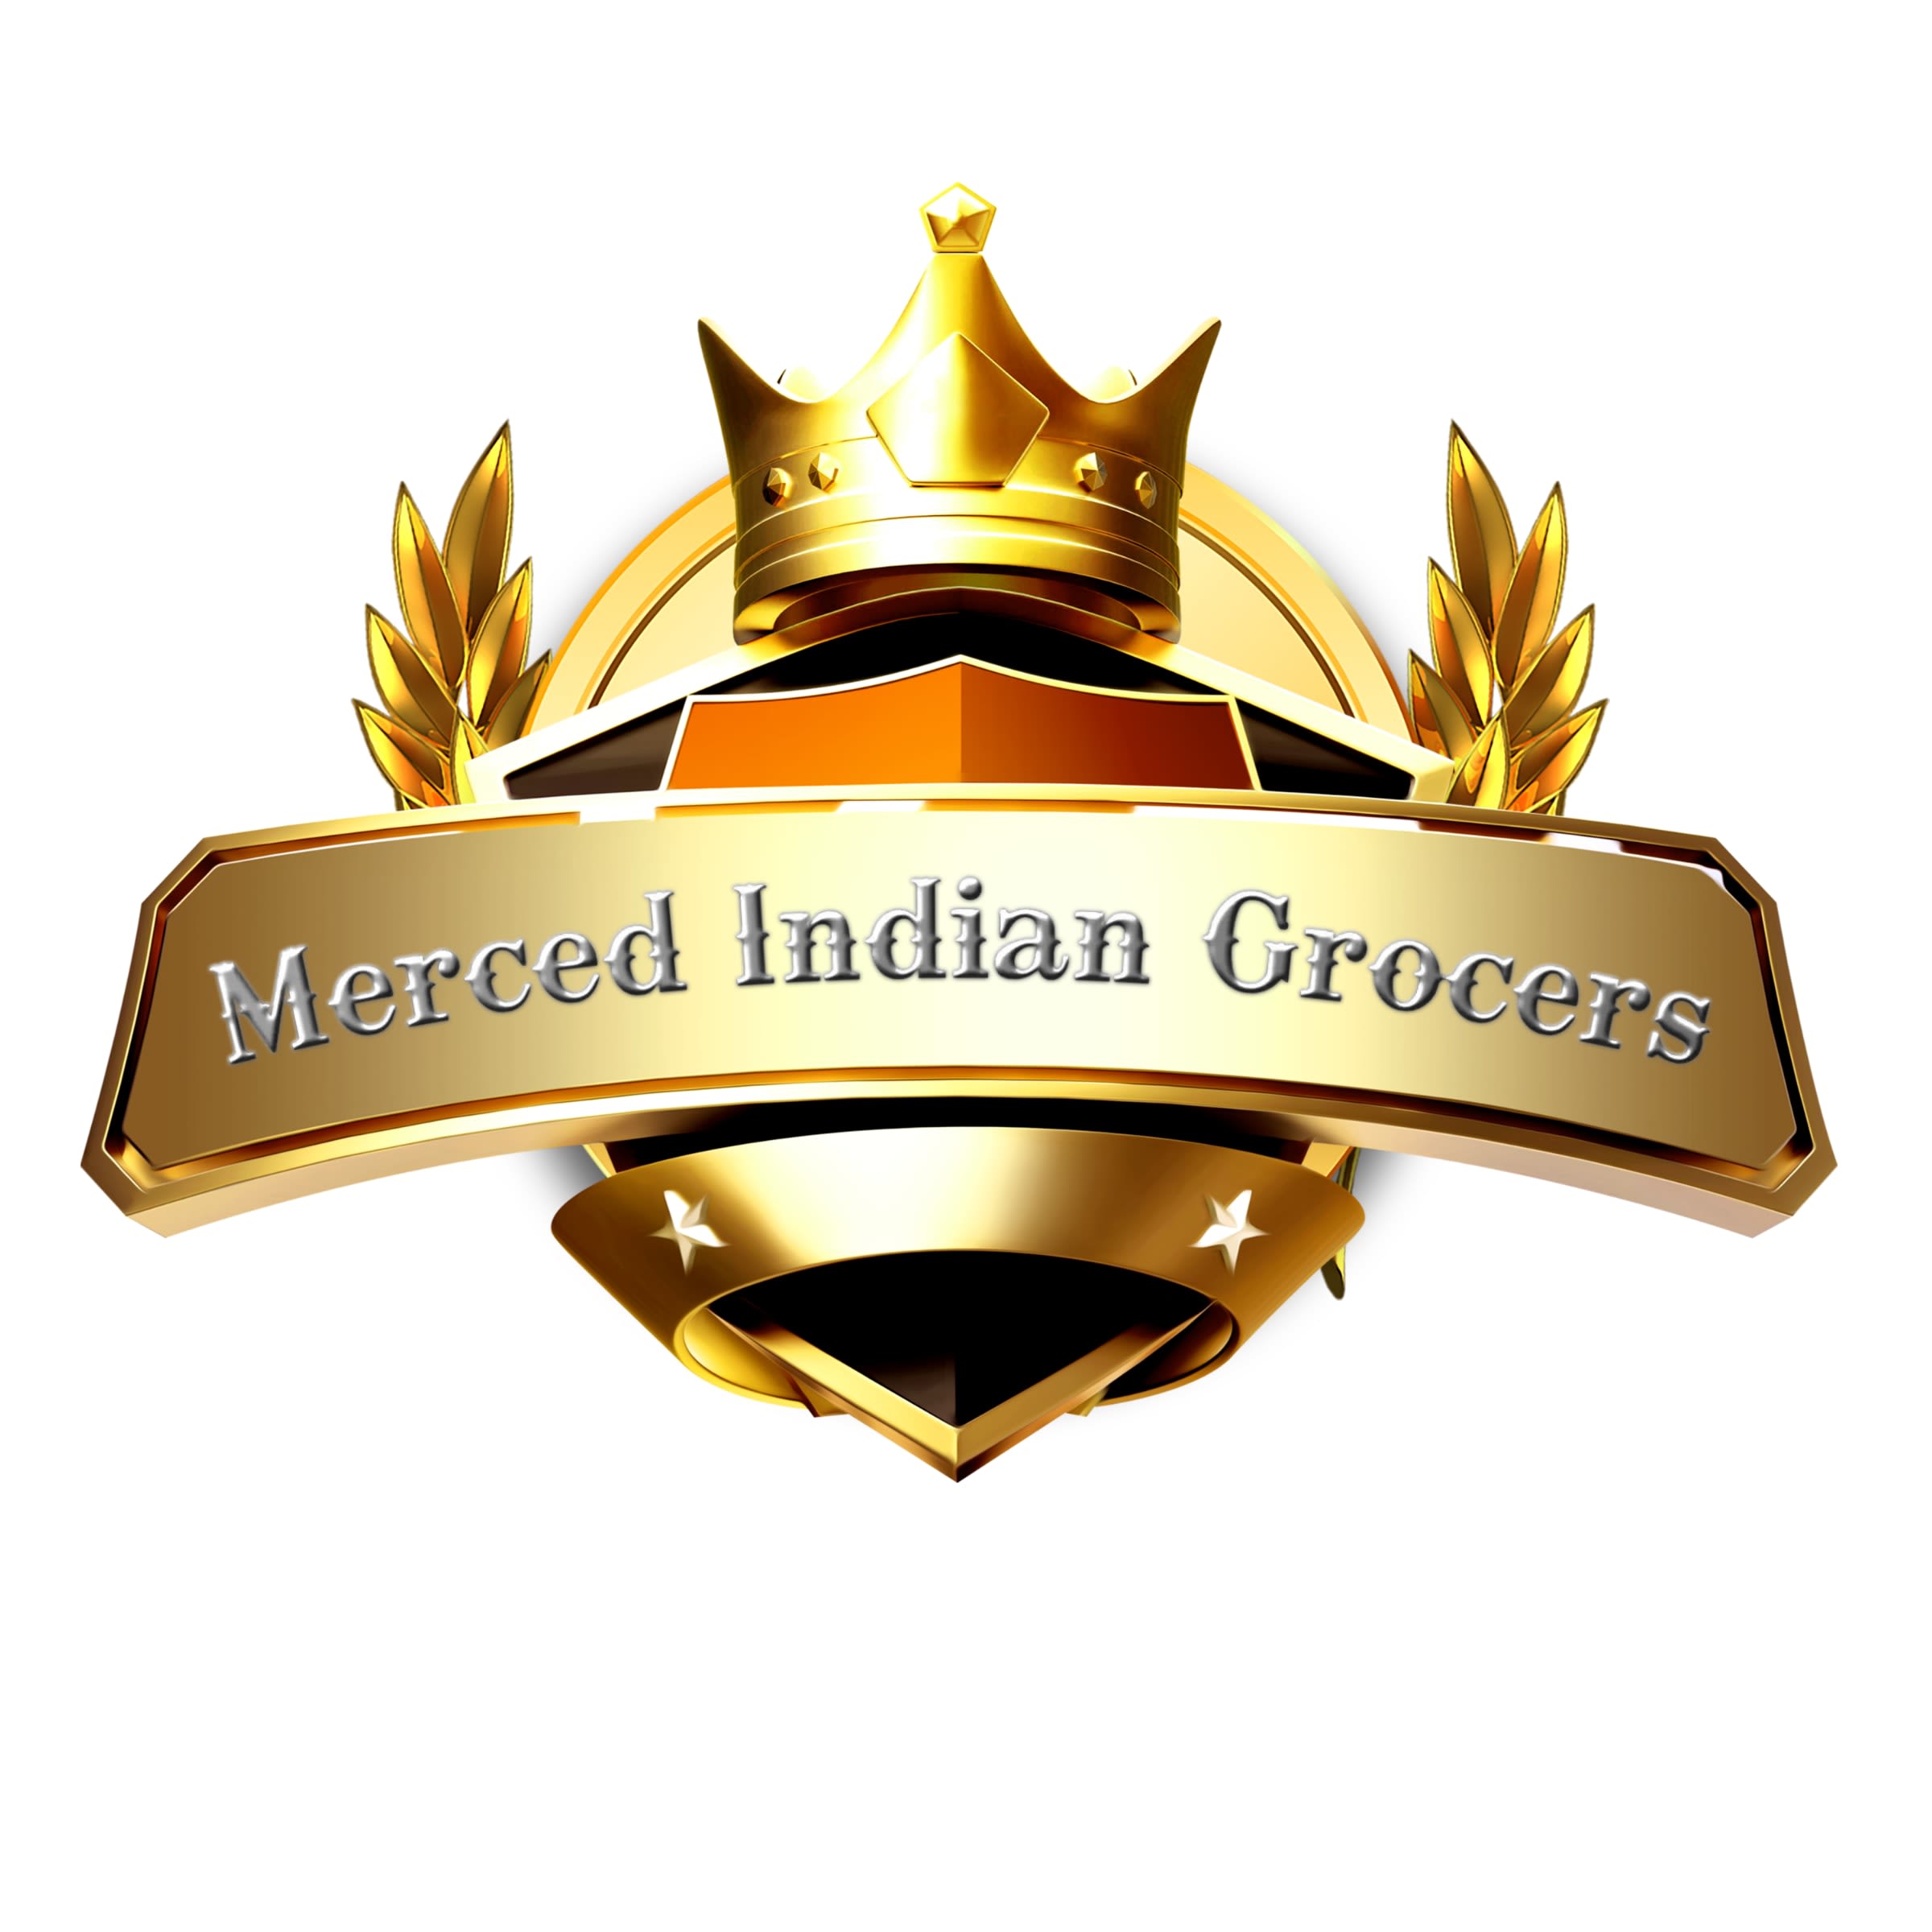 Merced Indian Grocers